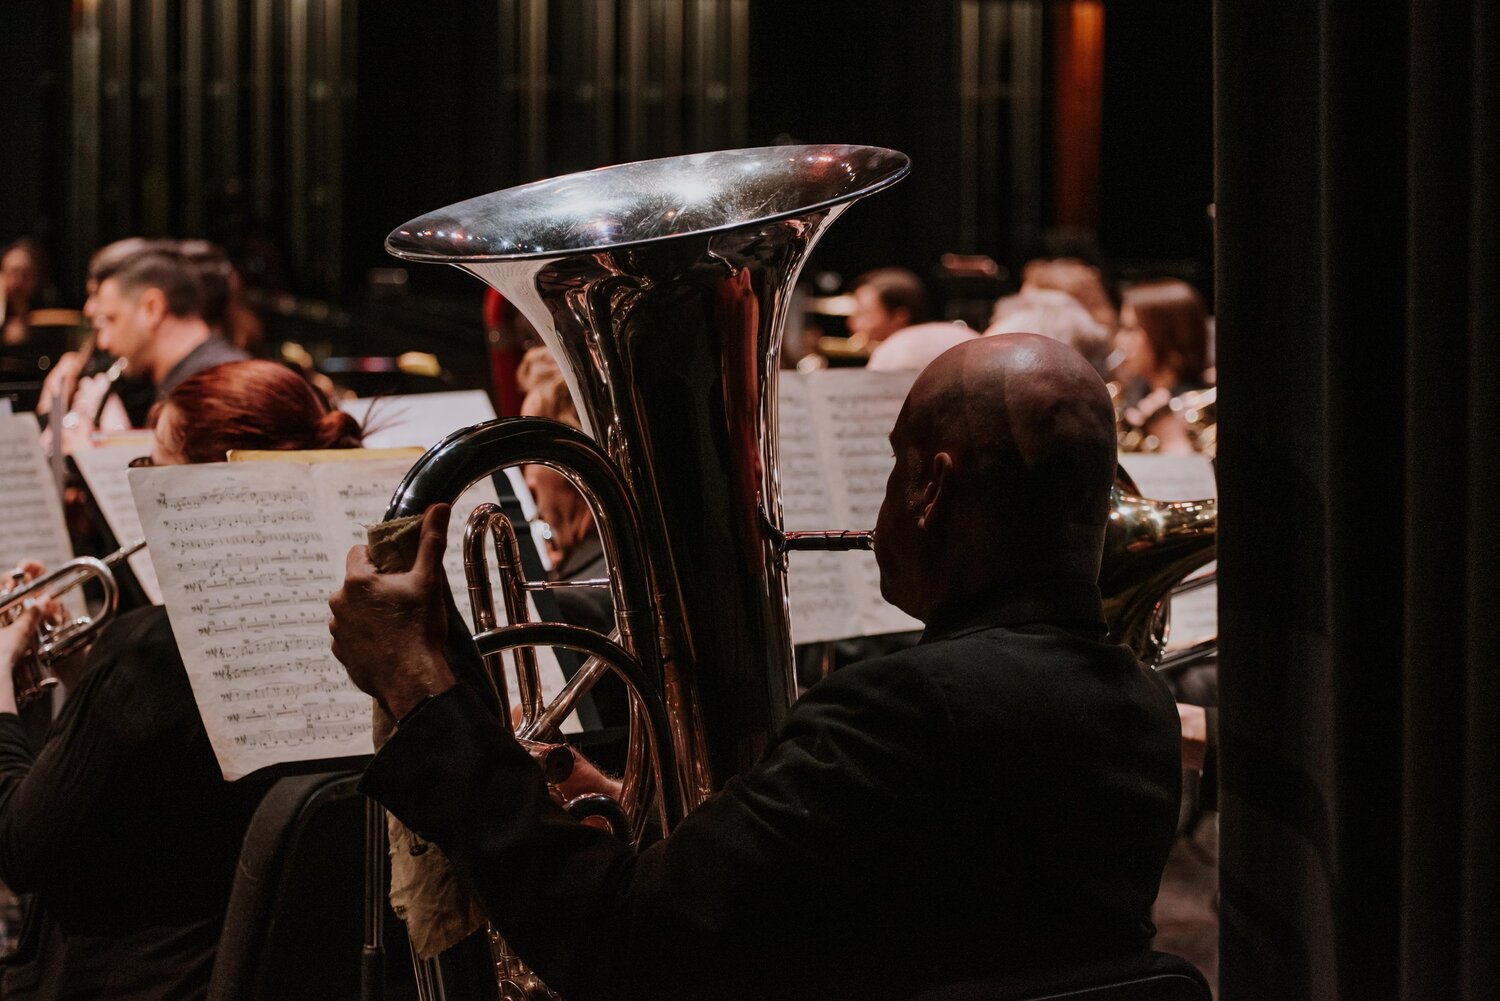 What Is The Loudest Instrument In An Orchestra